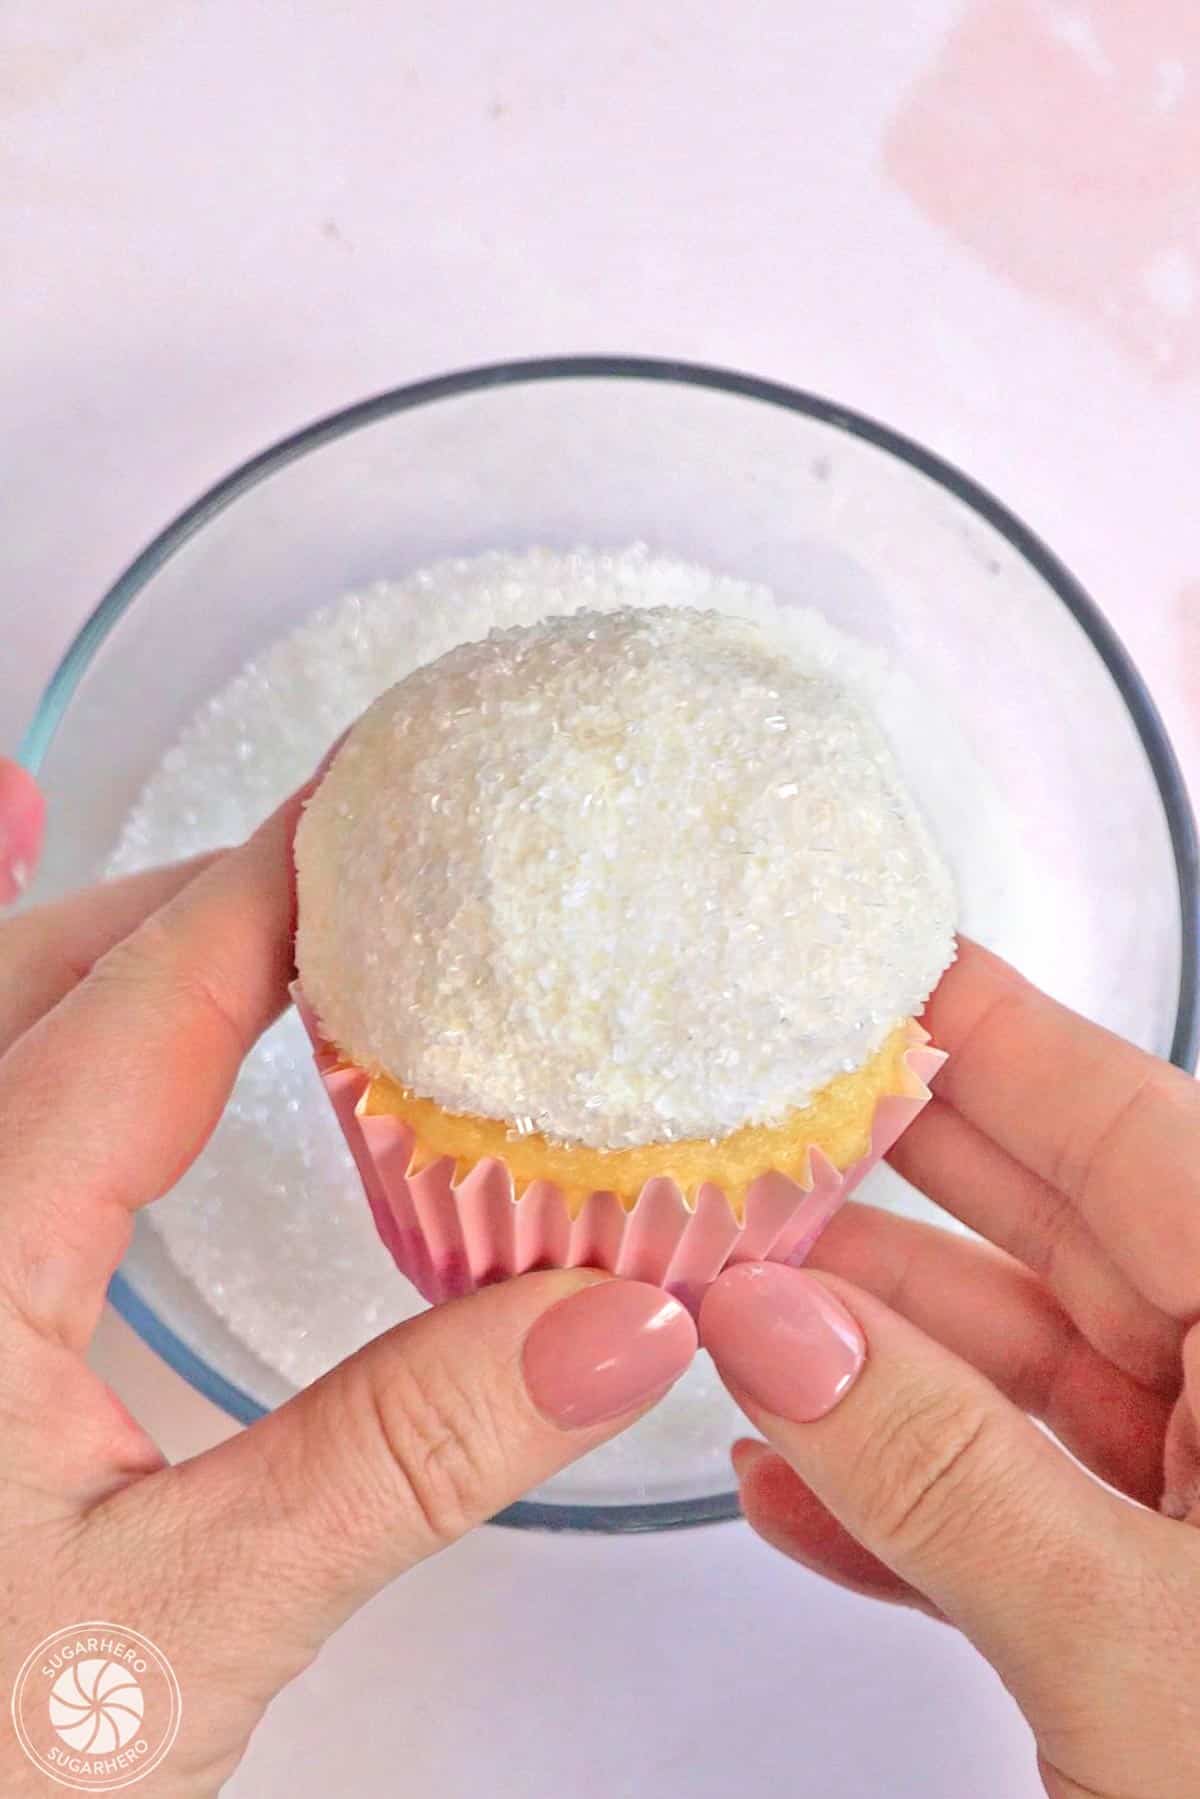 Rolling the top of a buttercream-covered cupcake in white sparkling sugar.